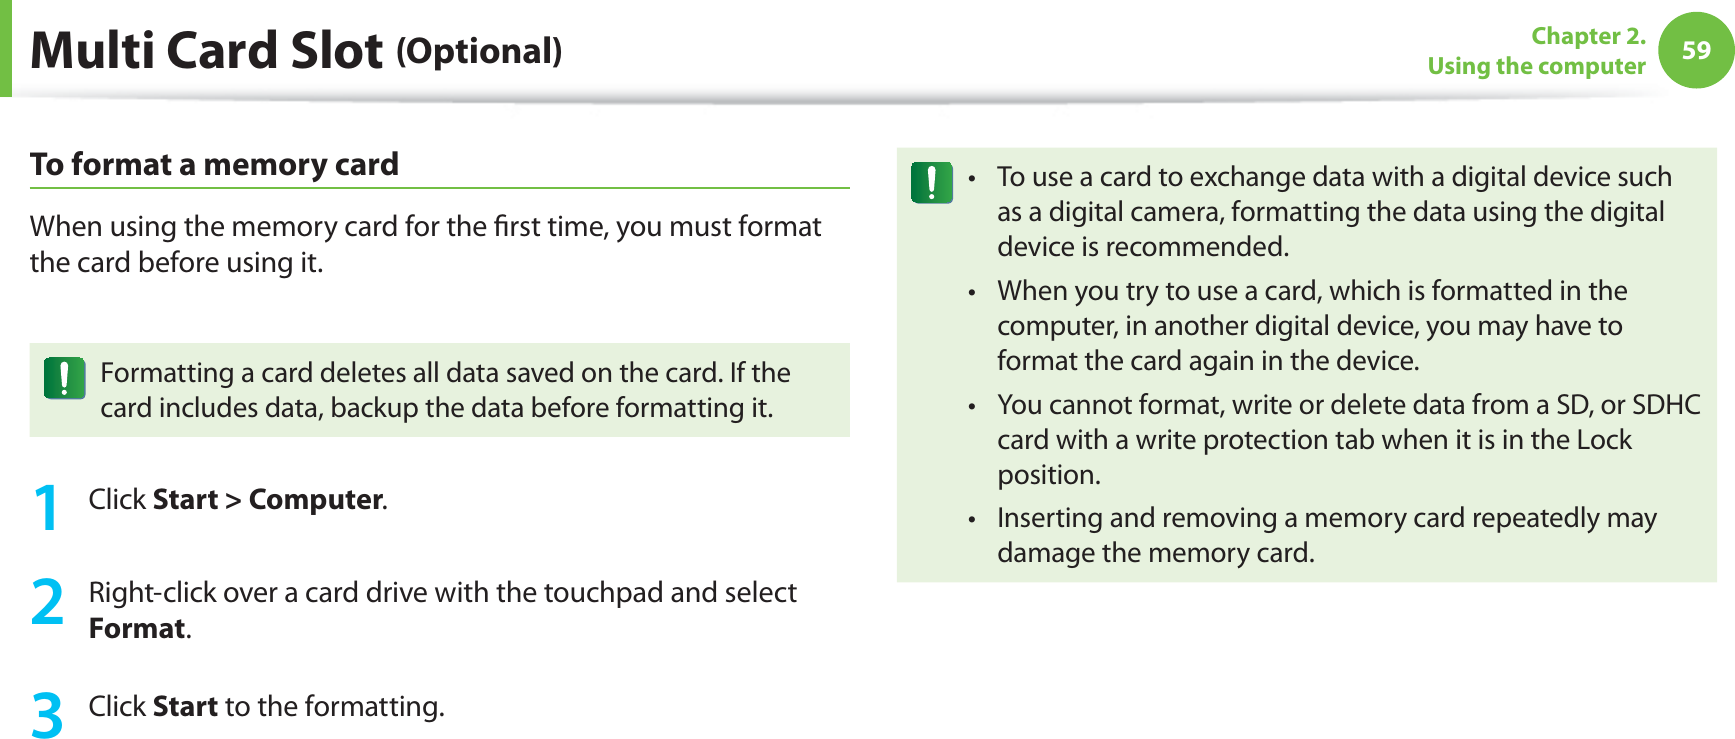 59Chapter 2.  Using the computerMulti Card Slot (Optional)To format a memory cardWhen using the memory card for the ﬁrst time, you must format the card before using it.Formatting a card deletes all data saved on the card. If the card includes data, backup the data before formatting it.1 Click Start &gt; Computer.2  Right-click over a card drive with the touchpad and select Format.3 Click Start to the formatting.To use a card to exchange data with a digital device such t as a digital camera, formatting the data using the digital device is recommended.When you try to use a card, which is formatted in the t computer, in another digital device, you may have to format the card again in the device.You cannot format, write or delete data from a SD, or SDHC t card with a write protection tab when it is in the Lock position.Inserting and removing a memory card repeatedly may t damage the memory card.